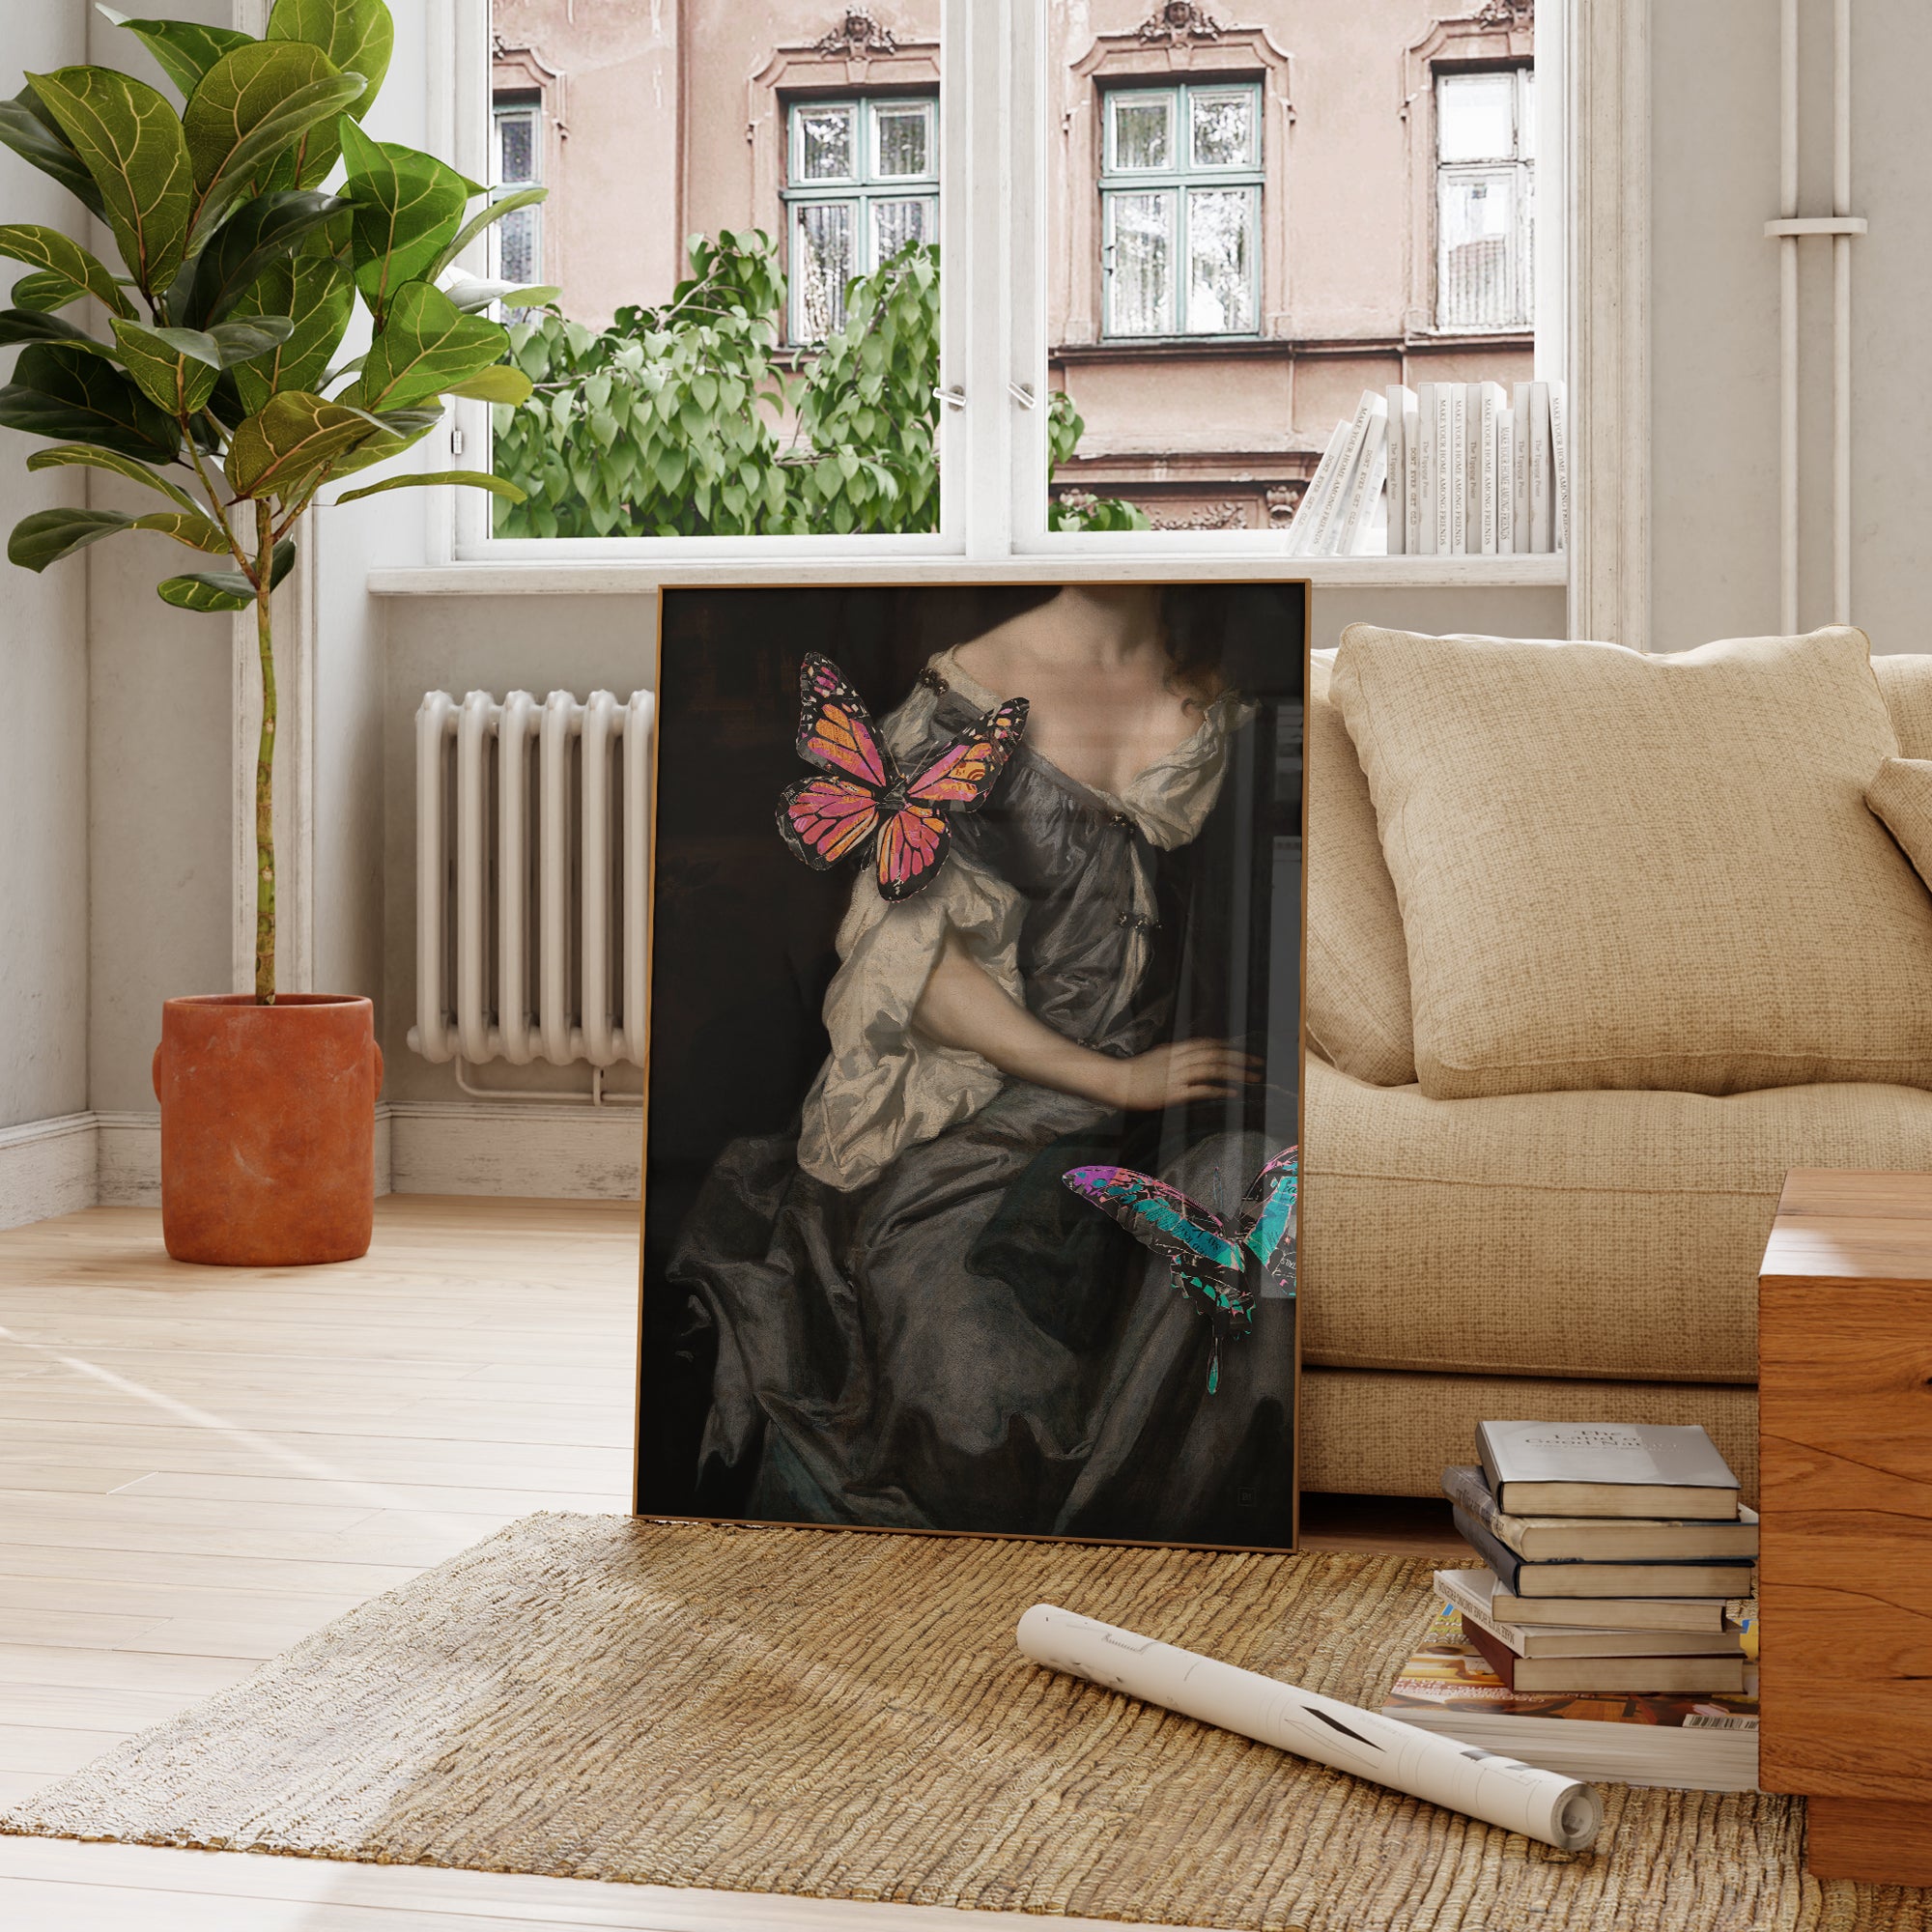 Be inspired by our Victorian portrait with gray dress and butterflies art print. This artwork was printed using the giclée process on archival acid-free paper and is presented in a french living room that captures its timeless beauty in every detail.